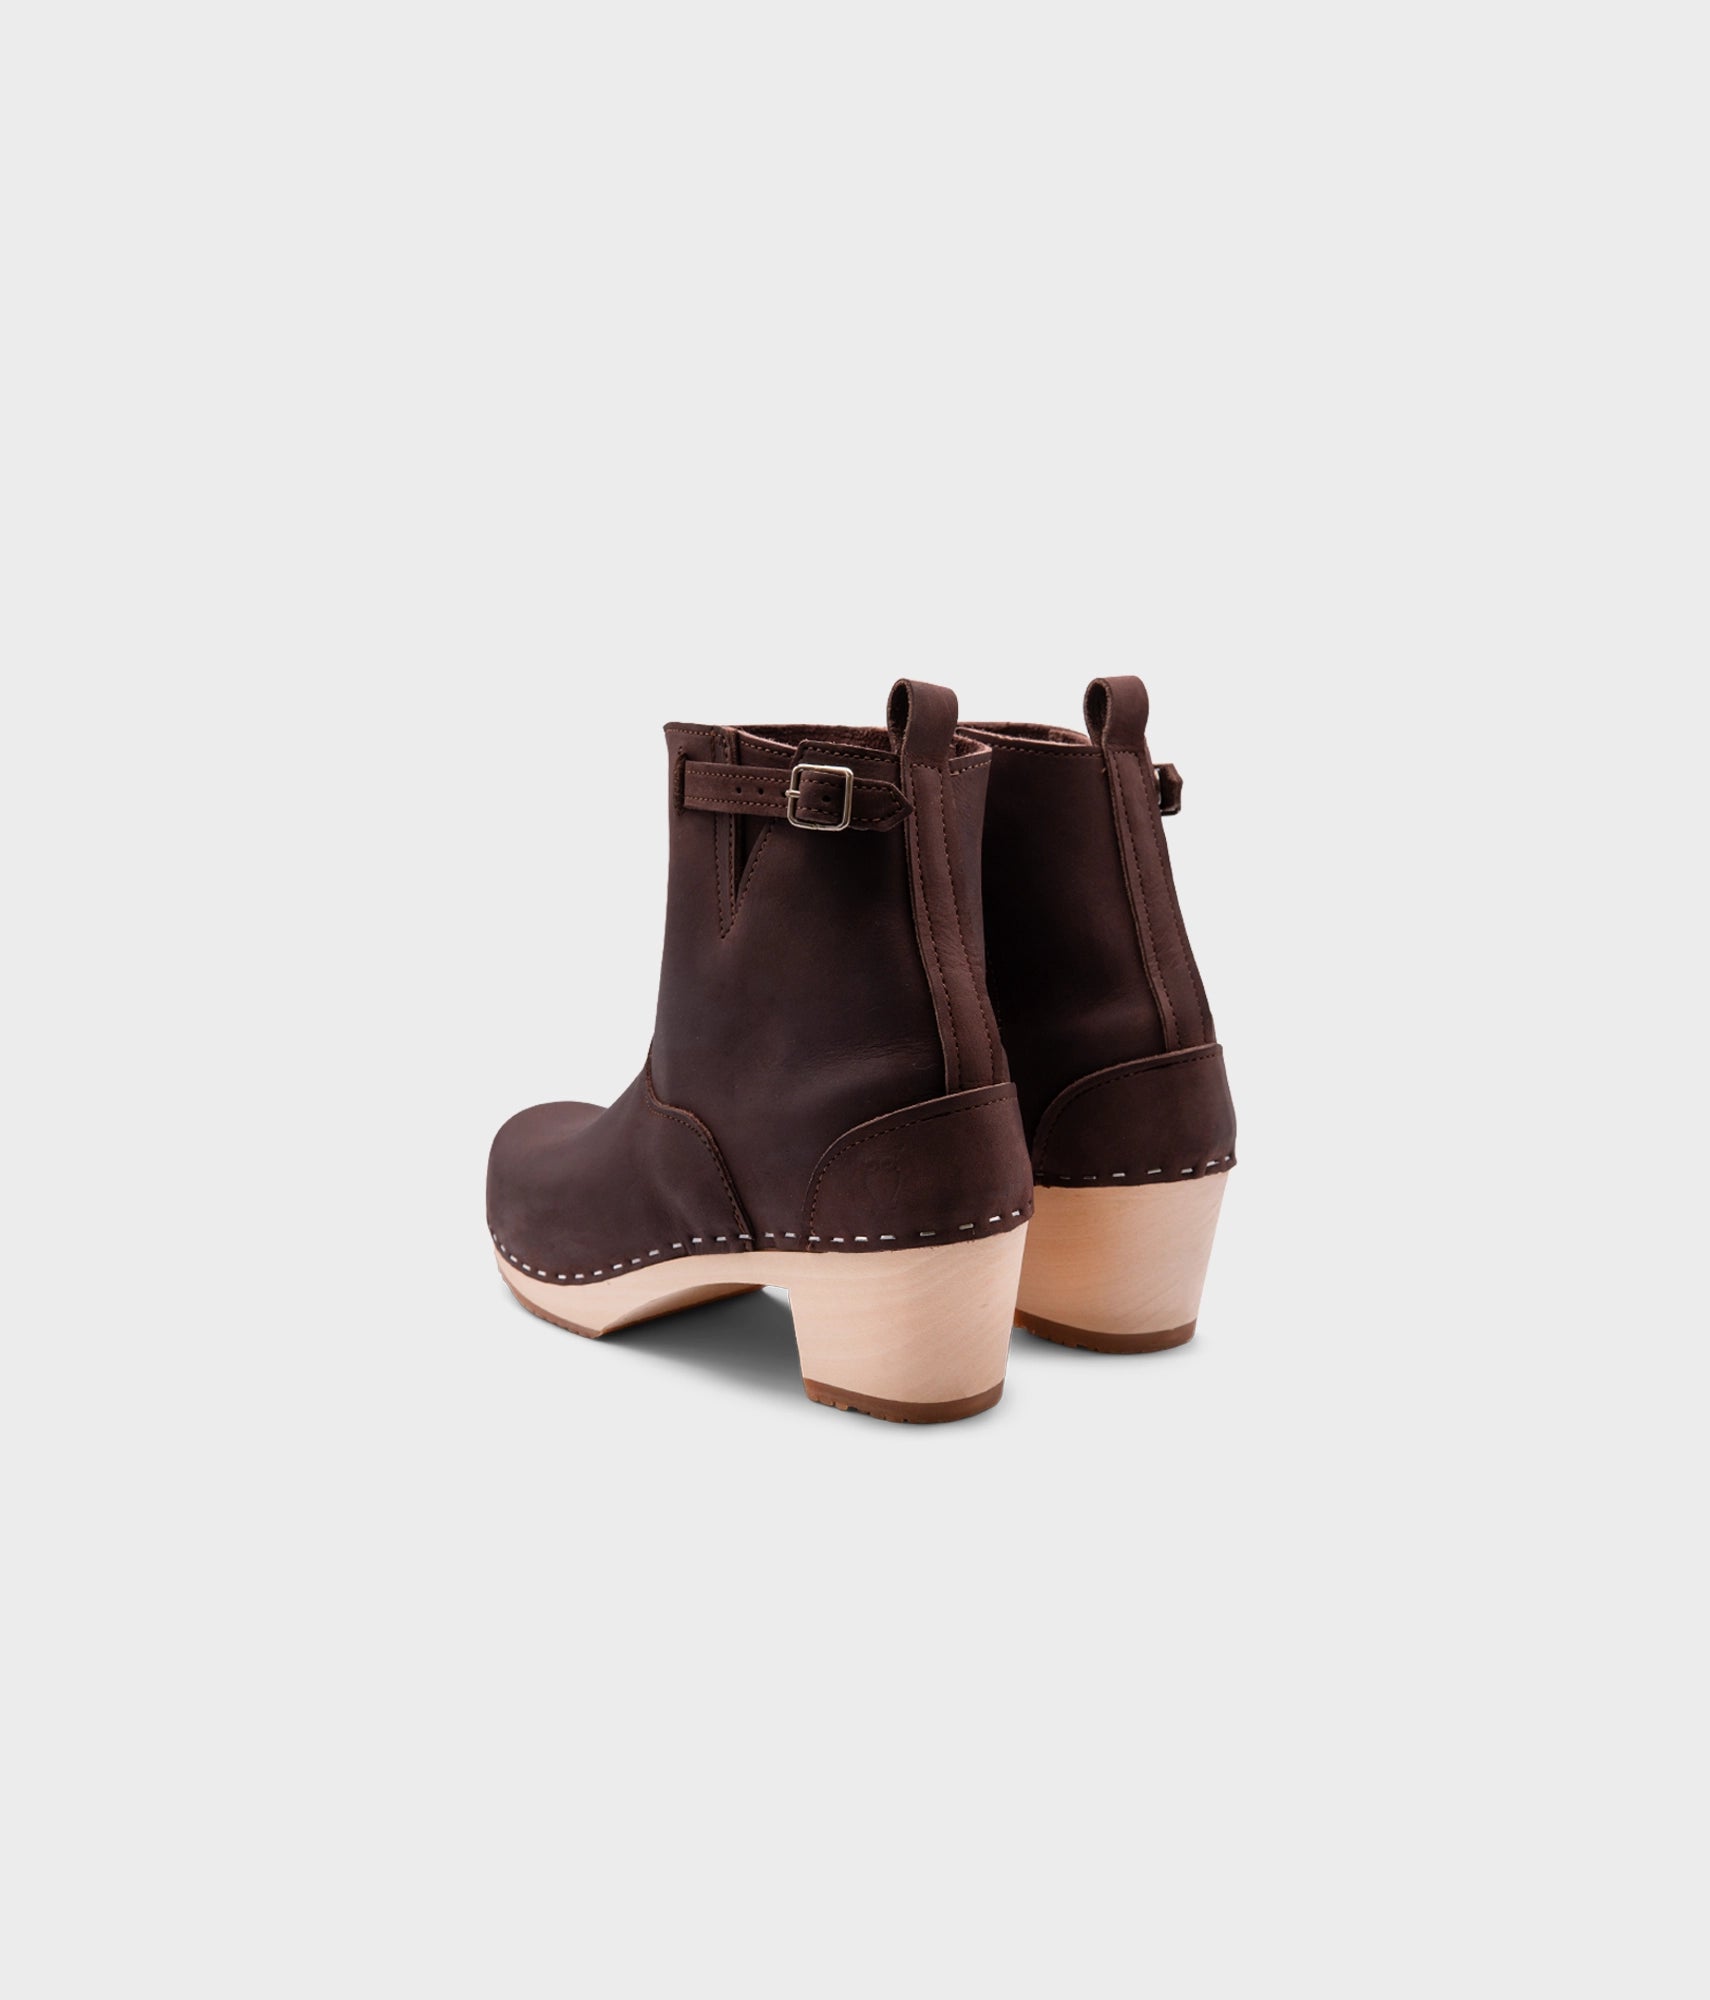 high-heeled clog boots in dark brown nubuck leather stapled on a light wooden base with a silver buckle